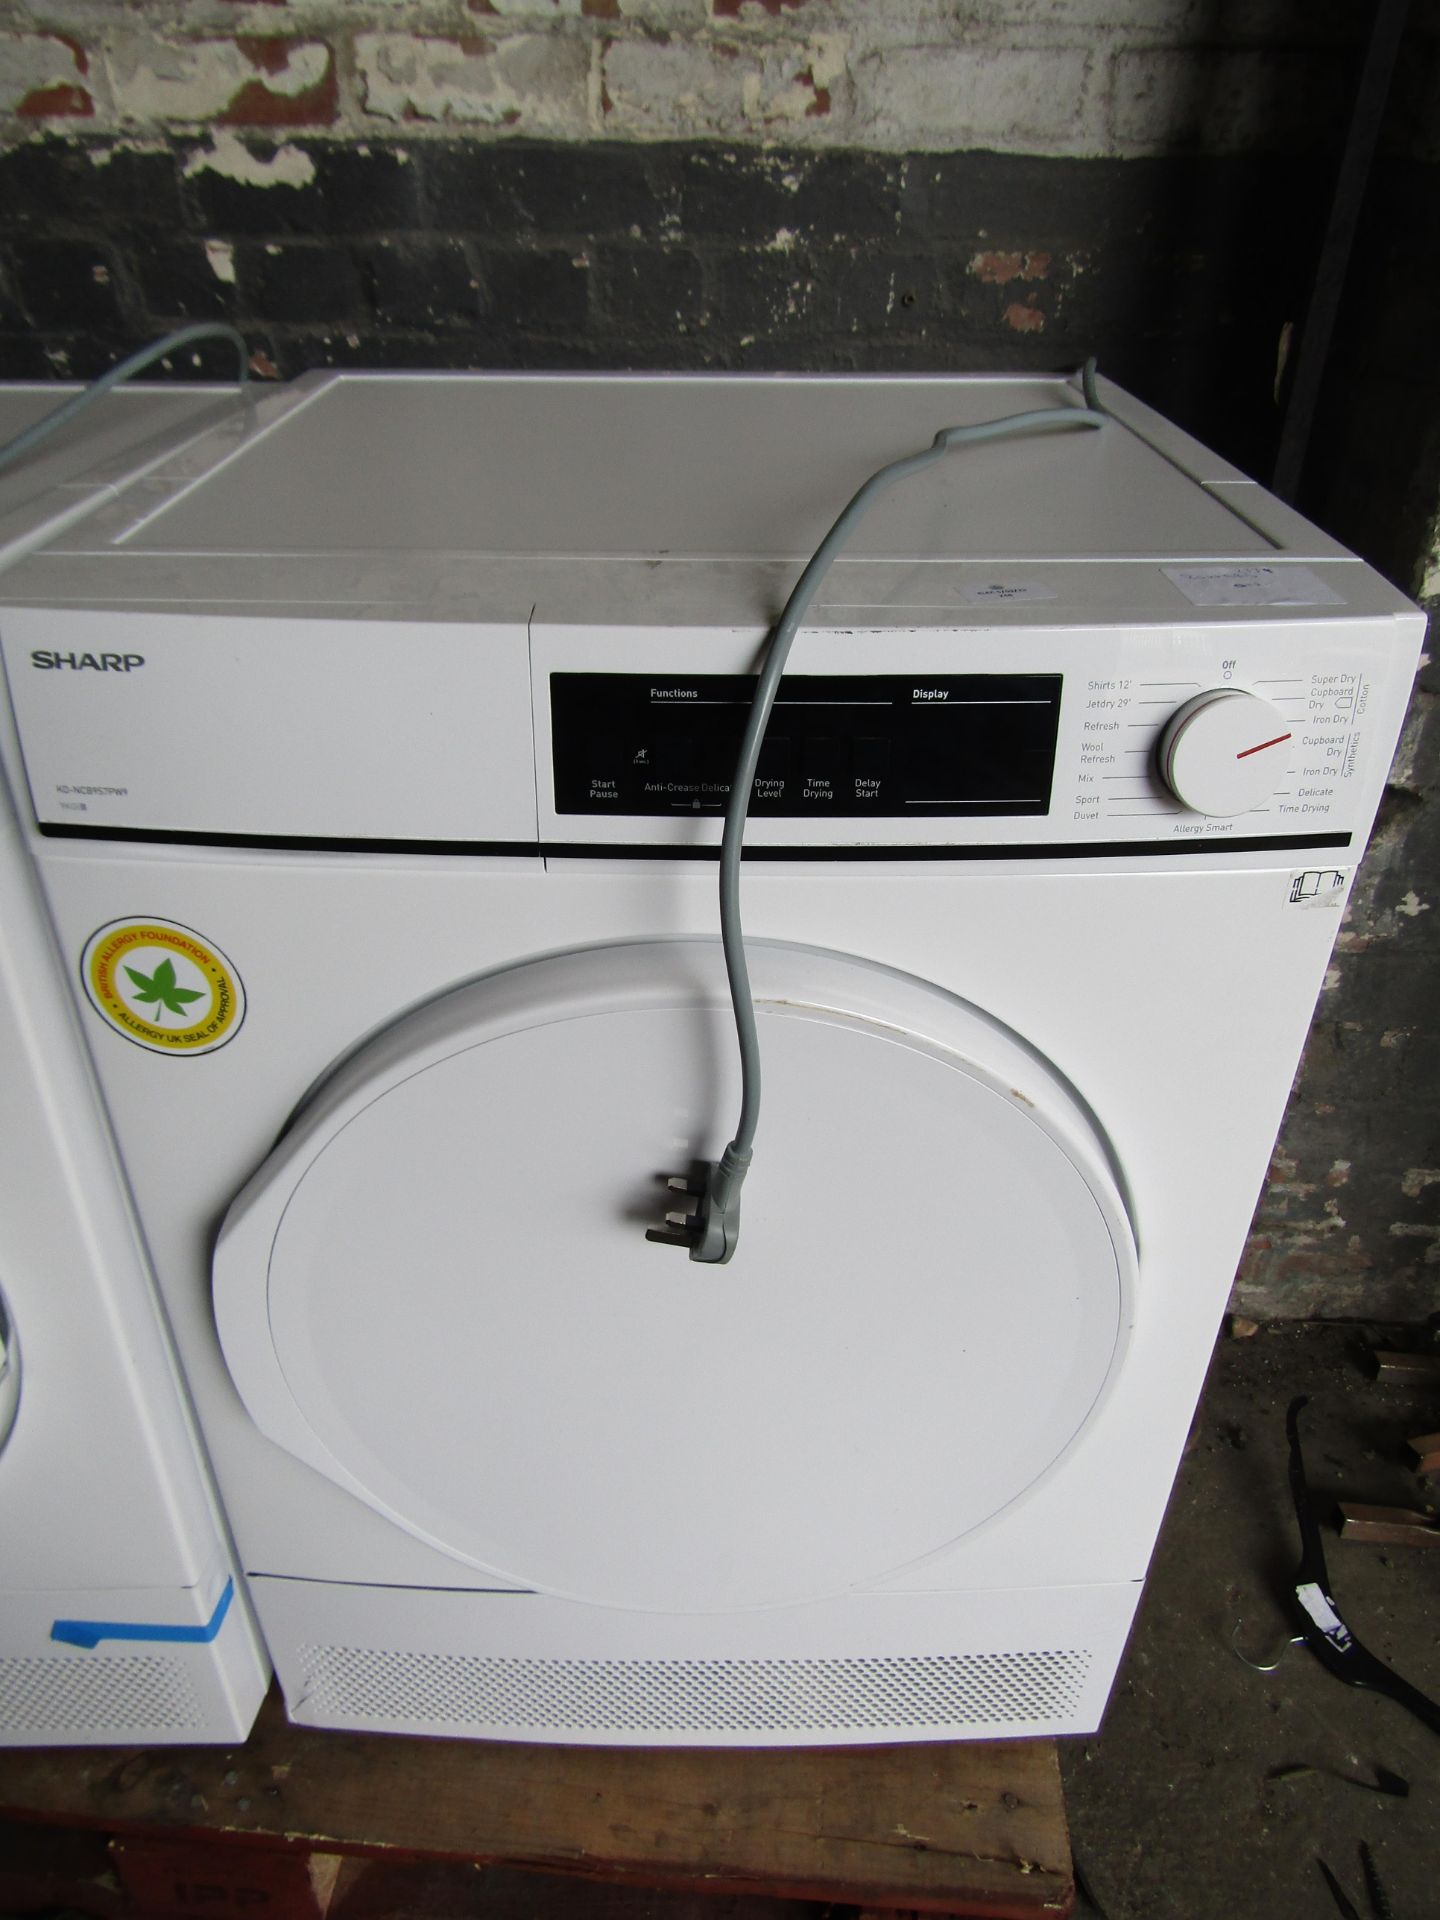 Sharp condenser dryer, it powers on but the control panel appears to be faulty as non of the buttoms